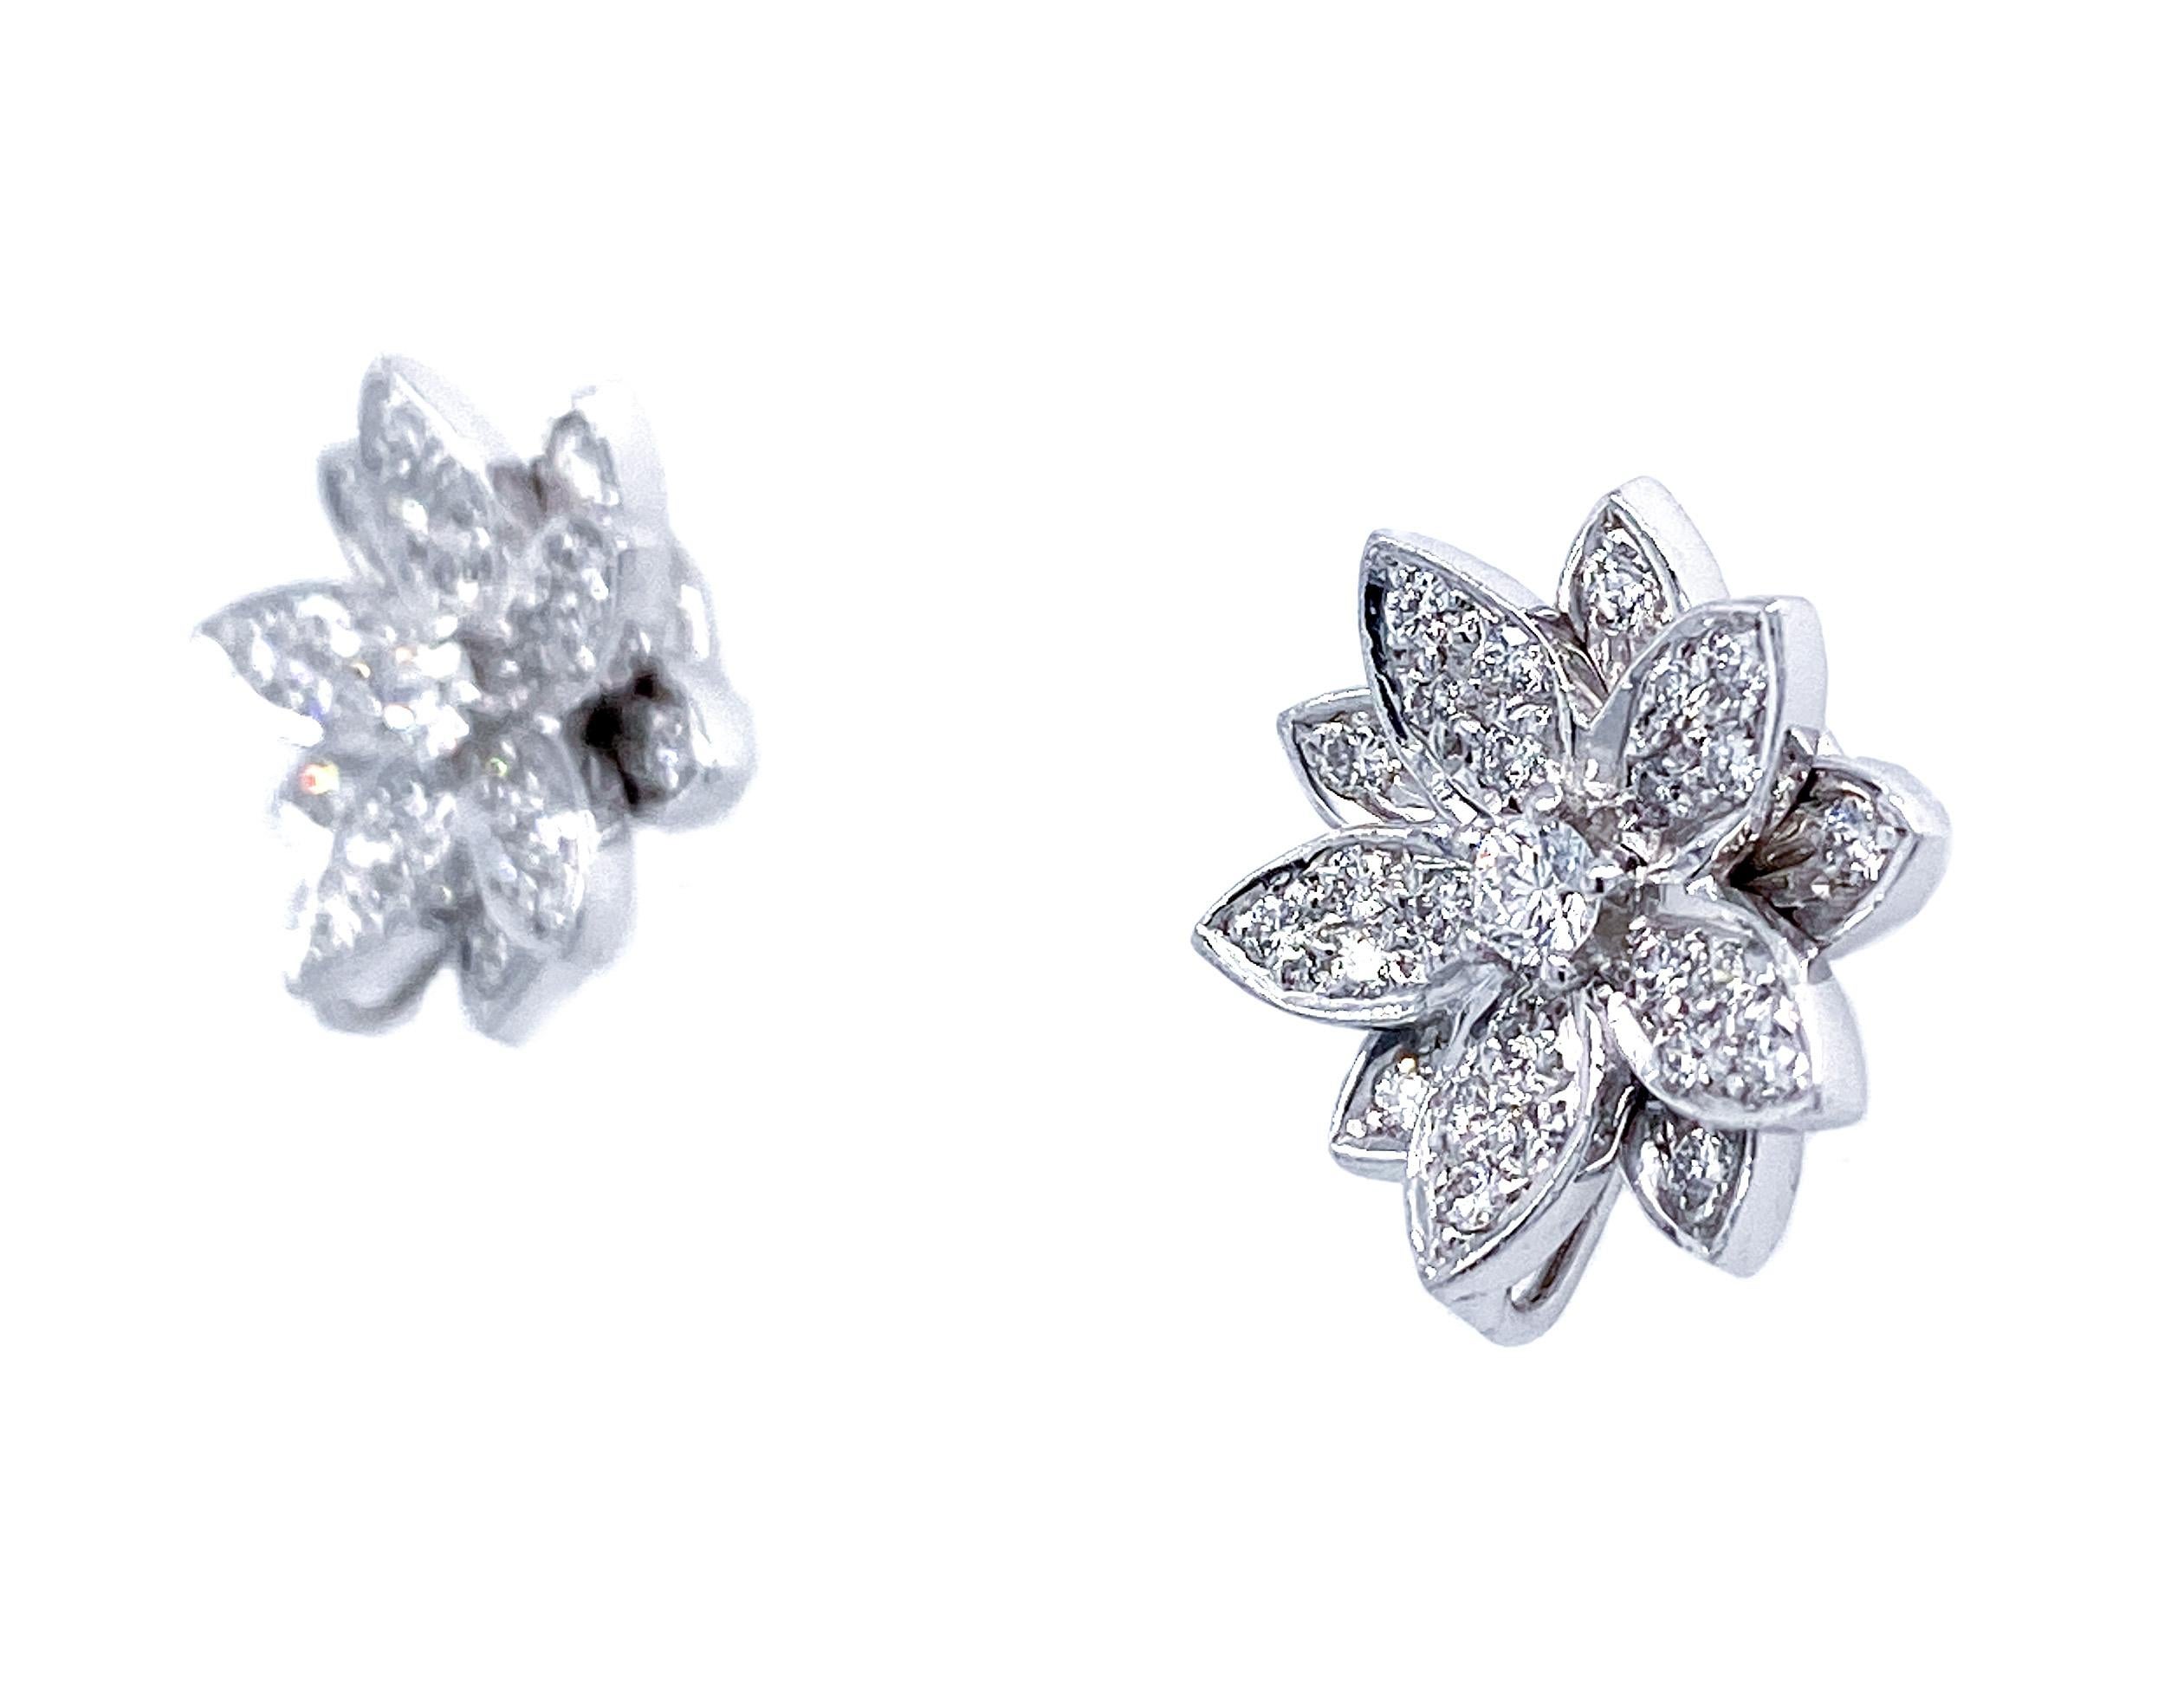 Always inspired by the beauty of nature and flowers, Hong Kong’s renowned yet private fine jewelry designer and Dilys’ creative director, Ms. Dilys Young, designed a simple and everyday pair of earrings that is nothing short of intricacy. A closer